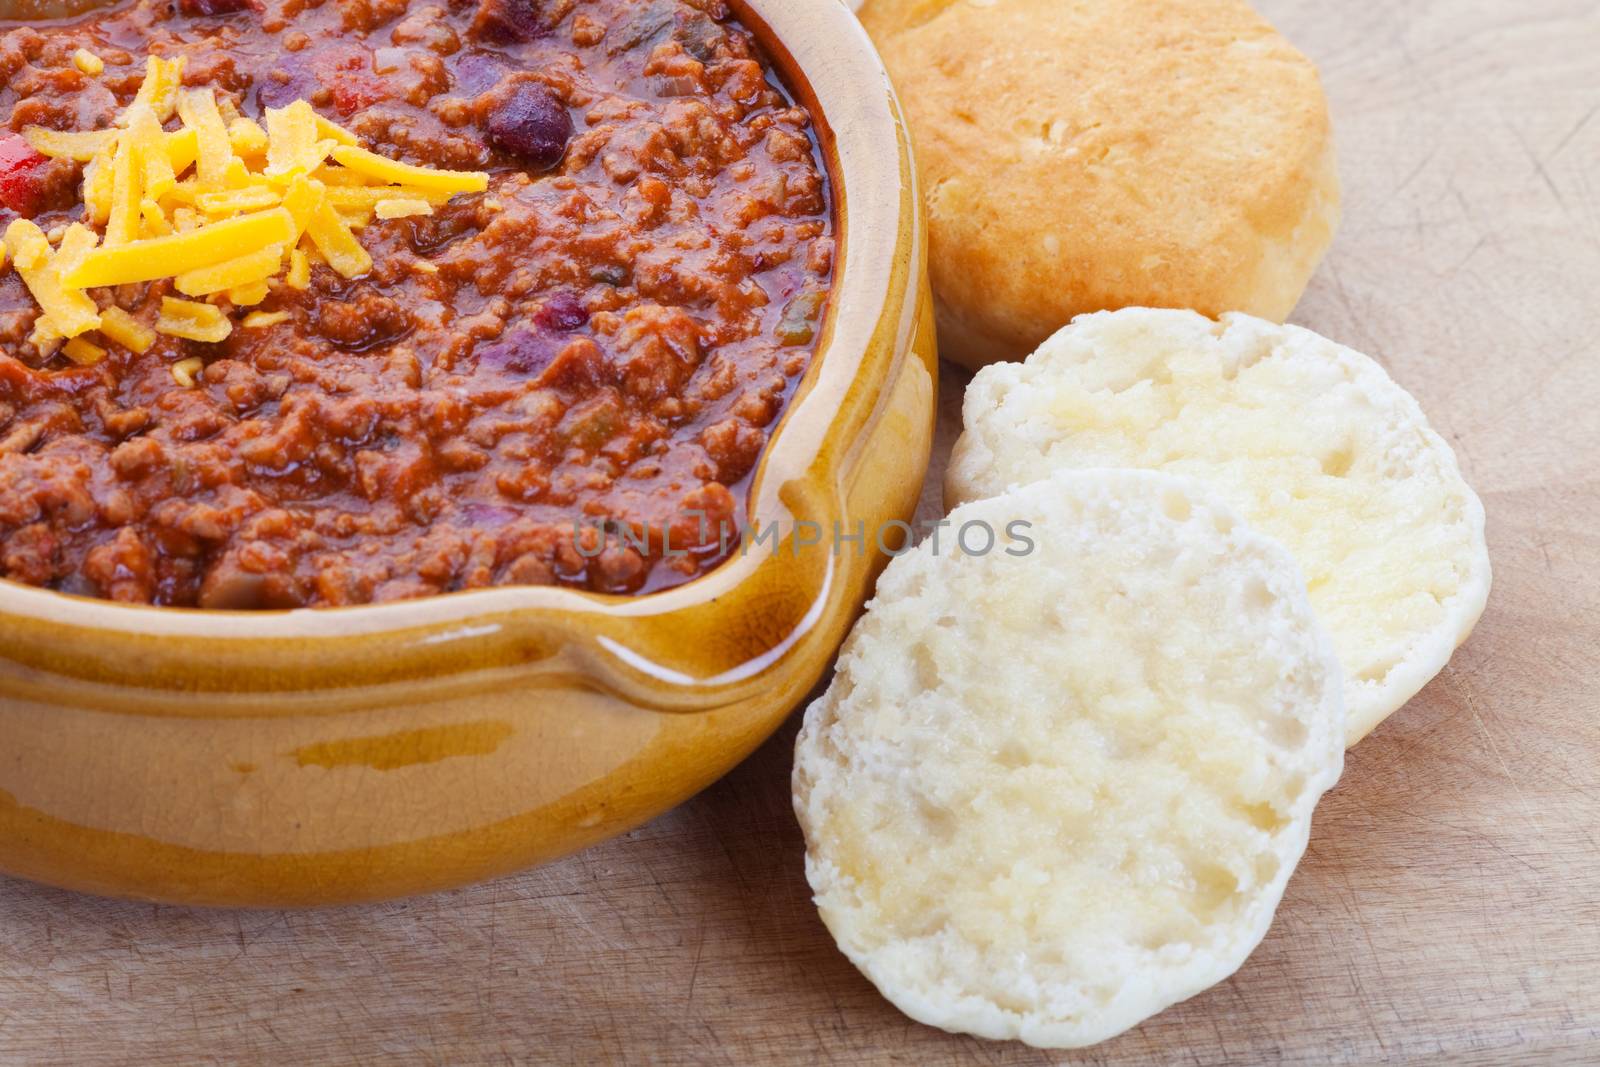 Chili Con Carne topped with shredded cheddar cheese, and served with hot buttered biscuits.